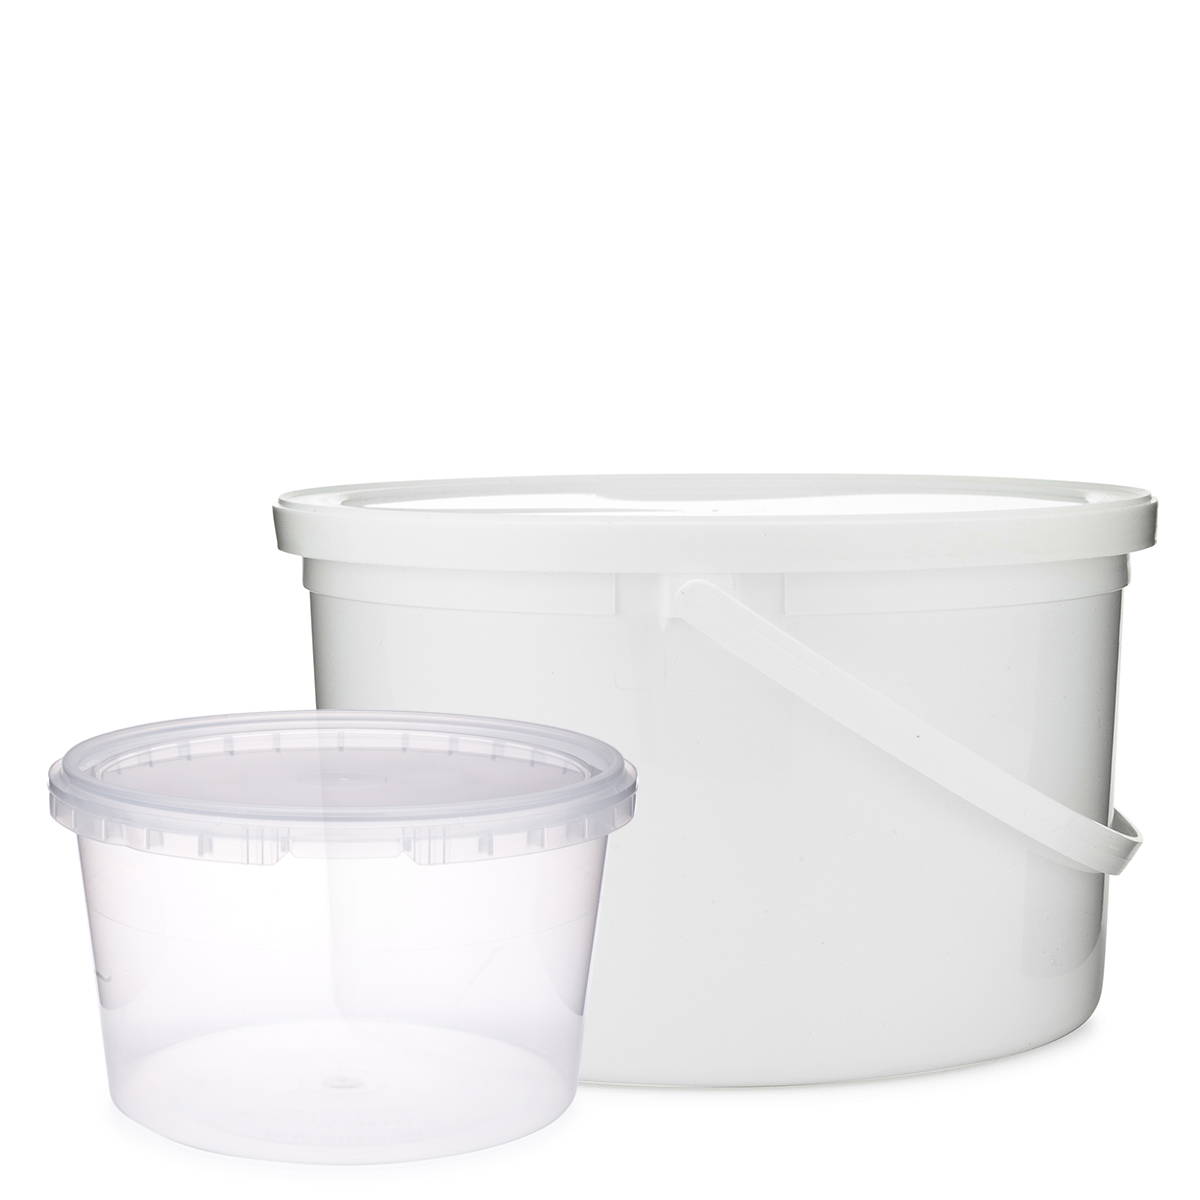 45 Count White Food Containers 85oz Large Food Buckets with Lids